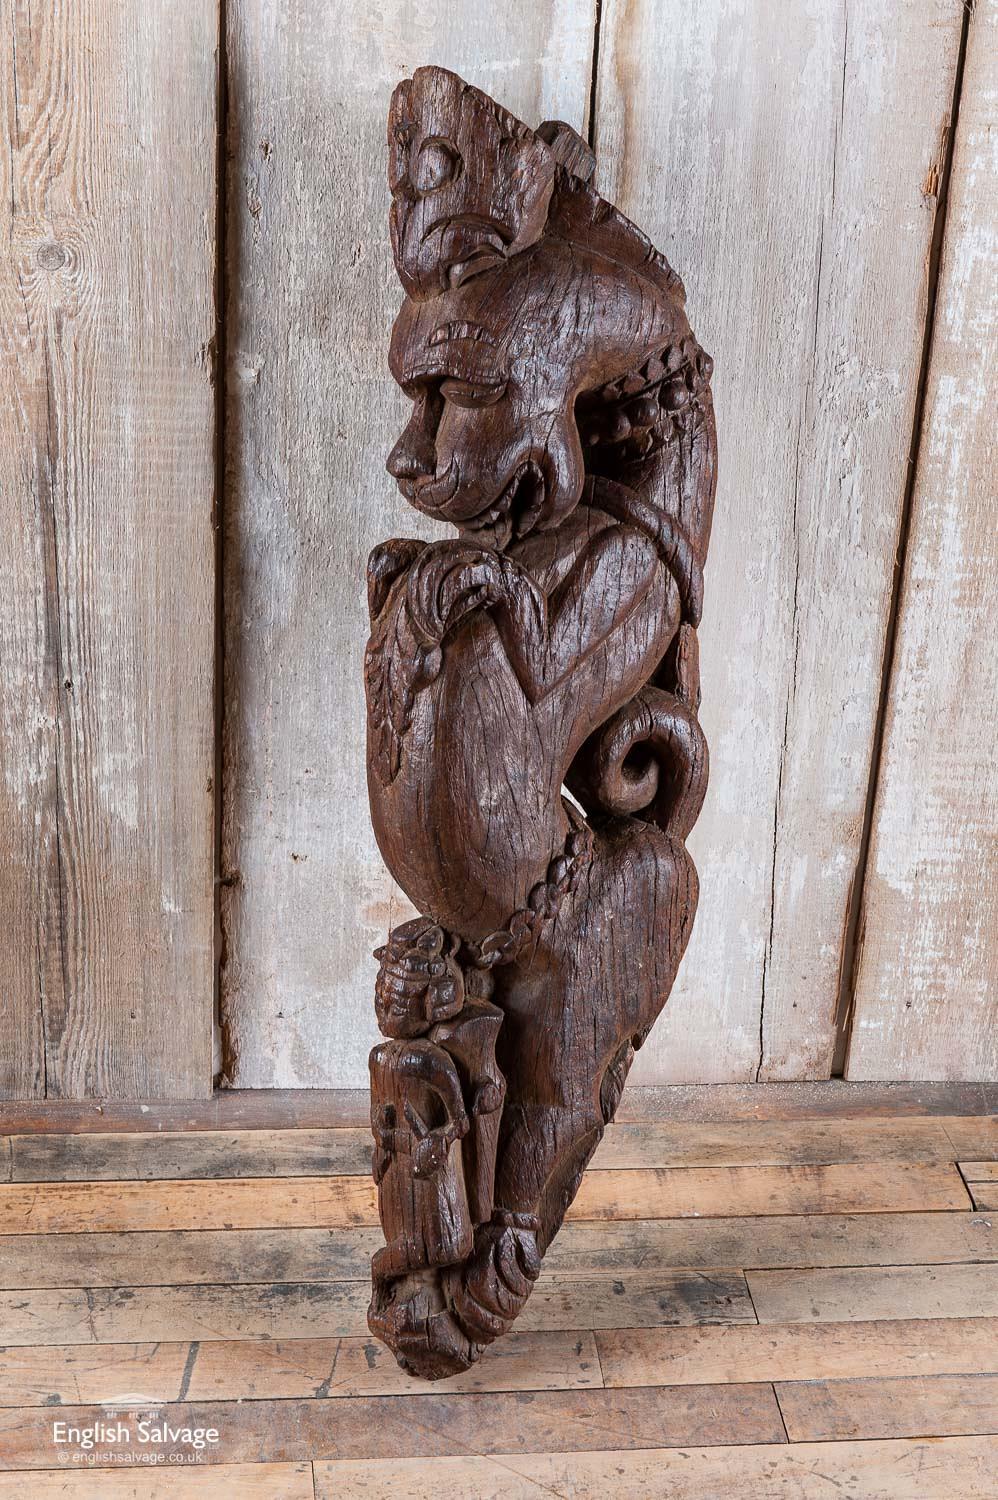 Unusual and impressive corbel or bracket in the form of a lion, hand carved from reclaimed teak. This could be a representation of Narasimha, an avatar of the Hindu God, Vishnu, which took the form of part-lion and part-man to destroy evil and